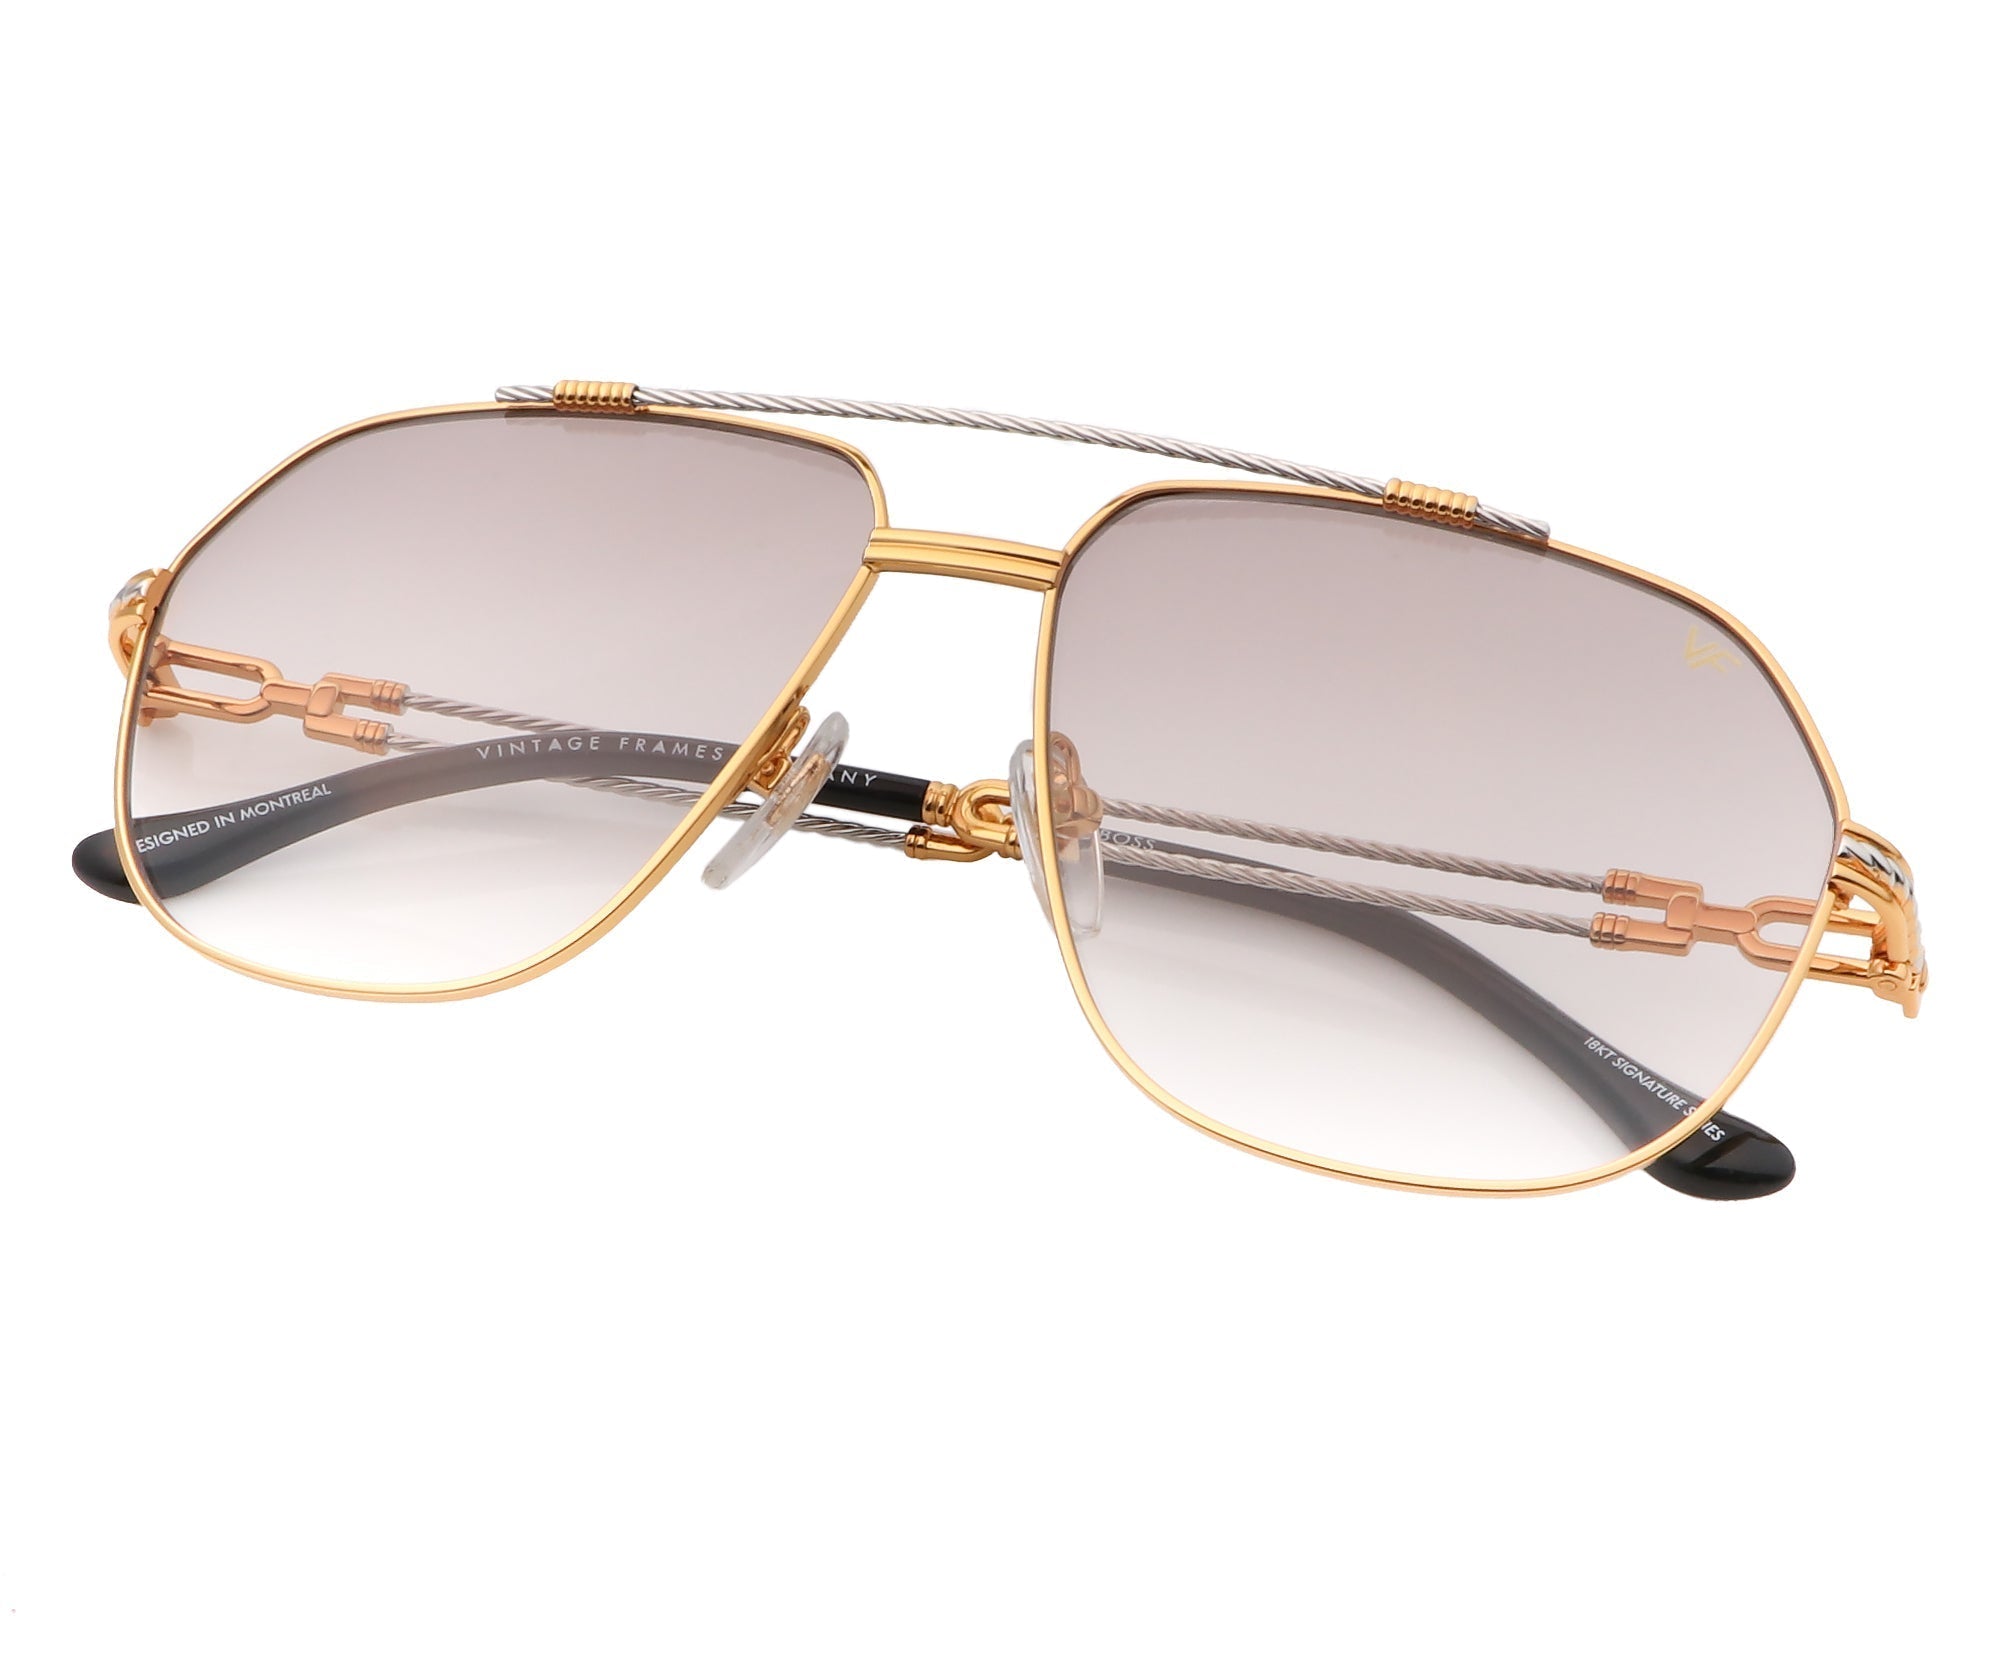 Vintage Frames Company VF Boss 18kt Gold Aviator Glasses Frames in Yellow Gold with Tobacco Gradient Lenses